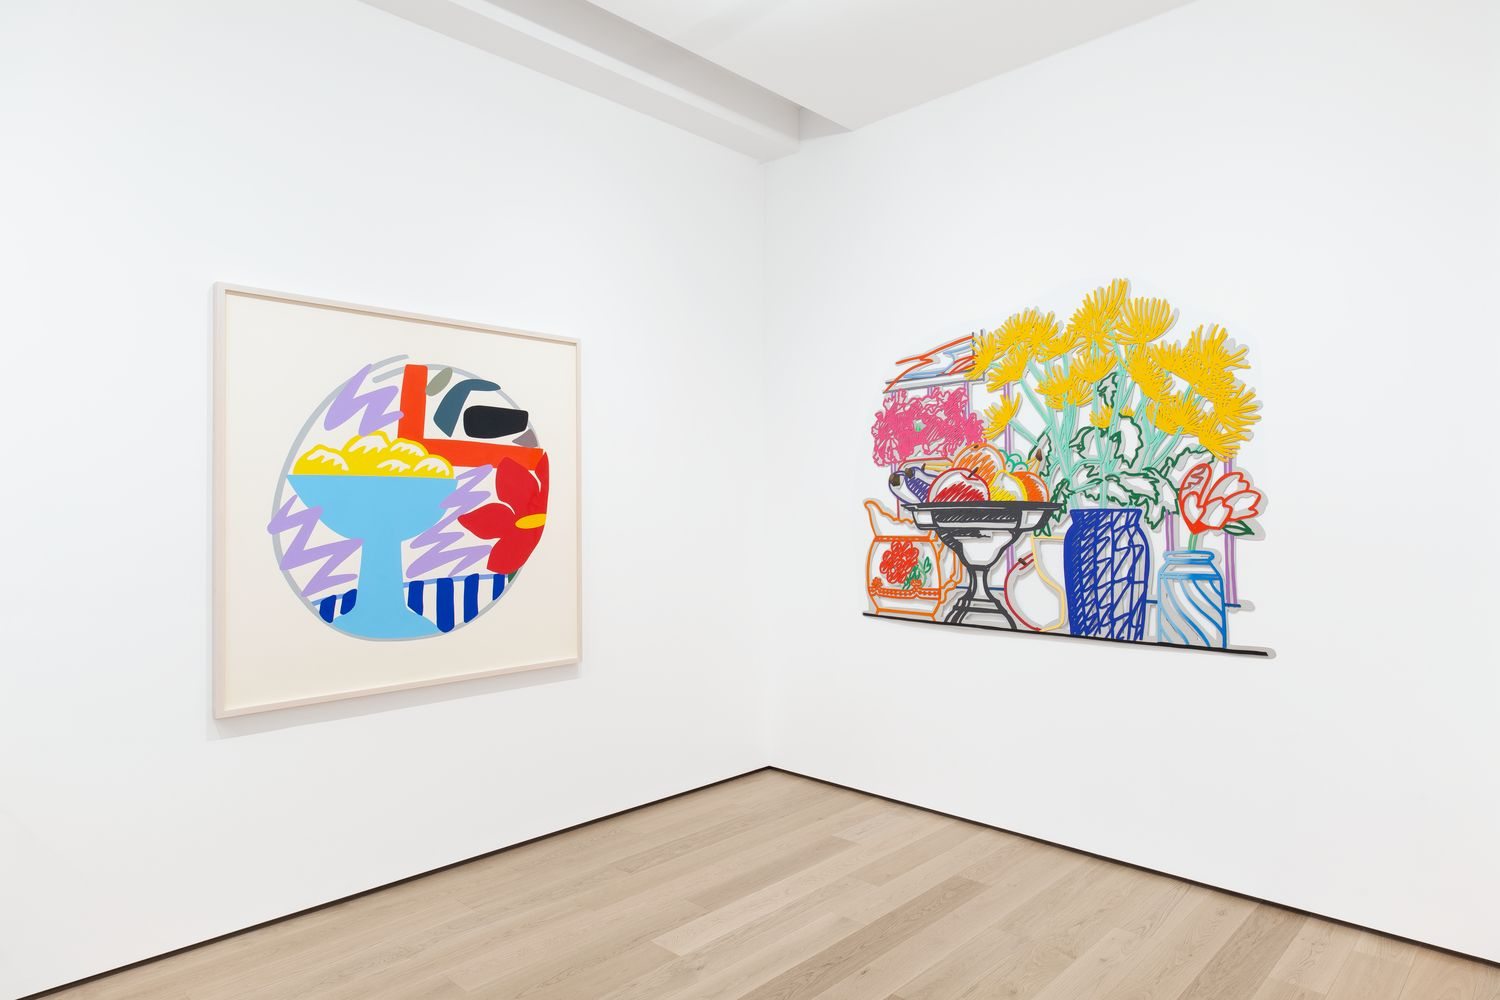 View of the exhibition ‘Still Life’ Almine Rech, Paris Matignon March 10 - April 10, 2021. Photo: Ana Drittanti. Courtesy of Almine Rech and © 2021 The Estate of Tom Wesselmann / Artists Rights Society (ARS), New York